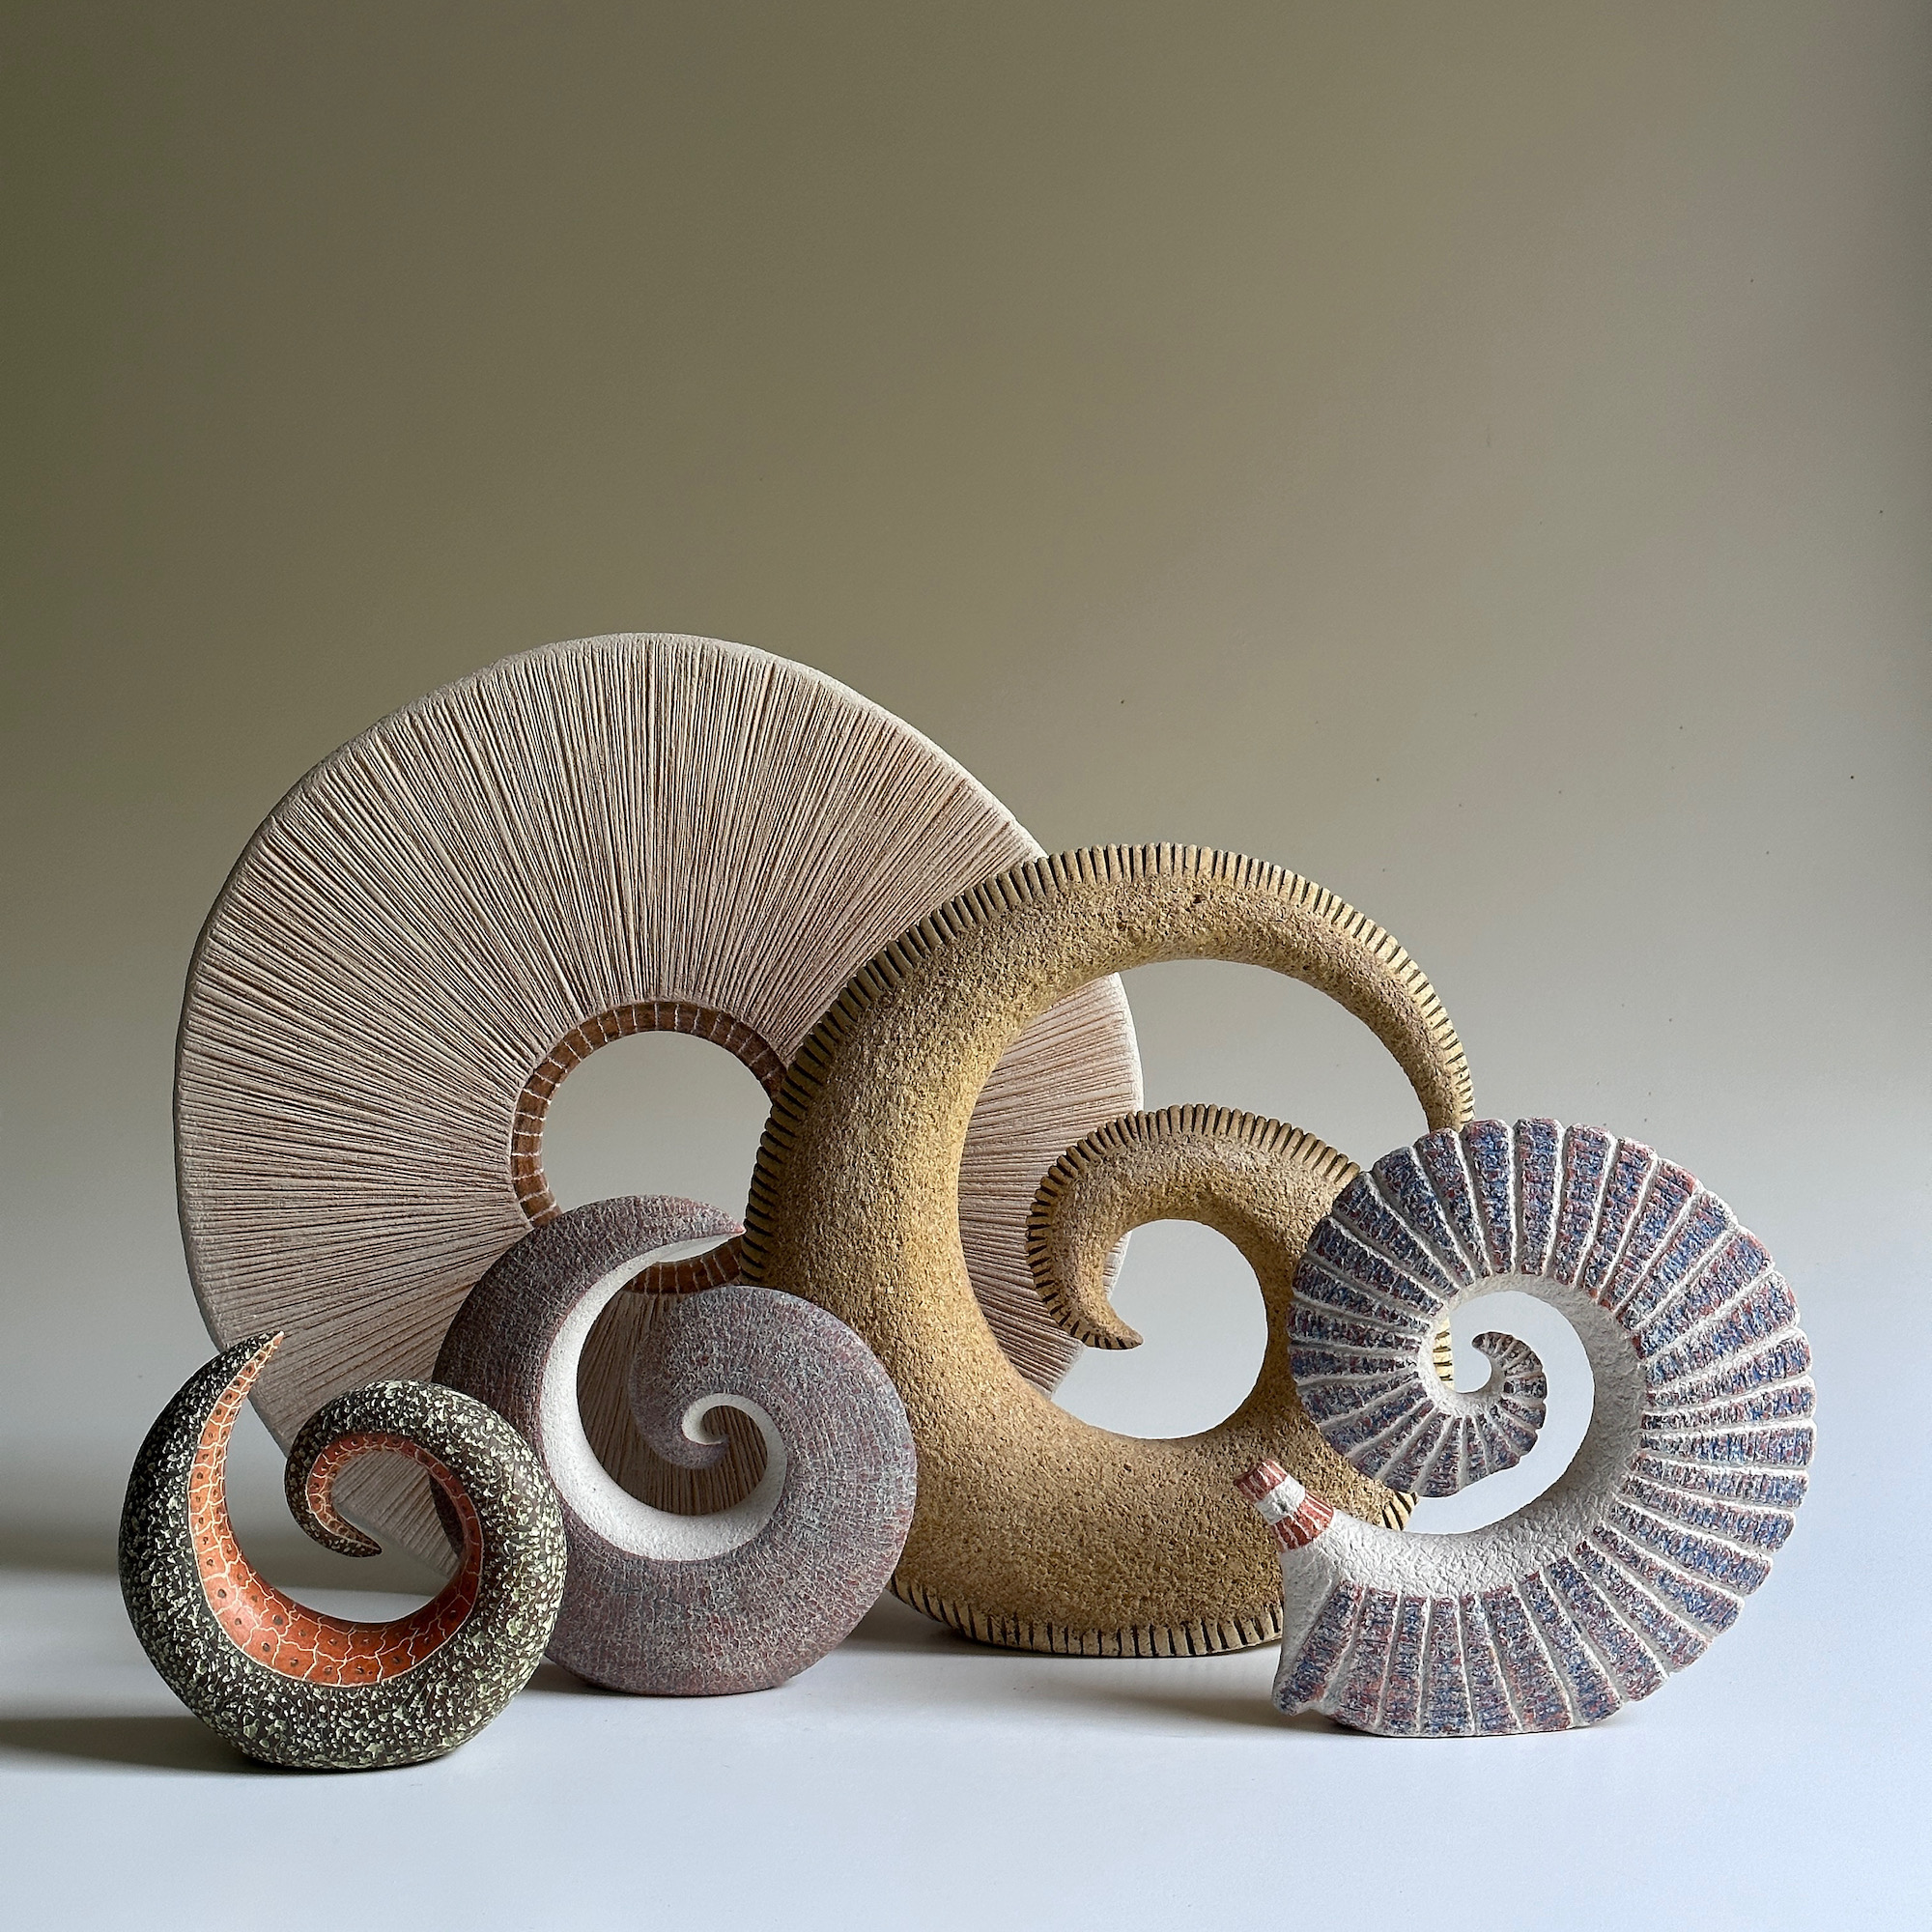 A group of ceramic spiral sculptures with a variety of textures.